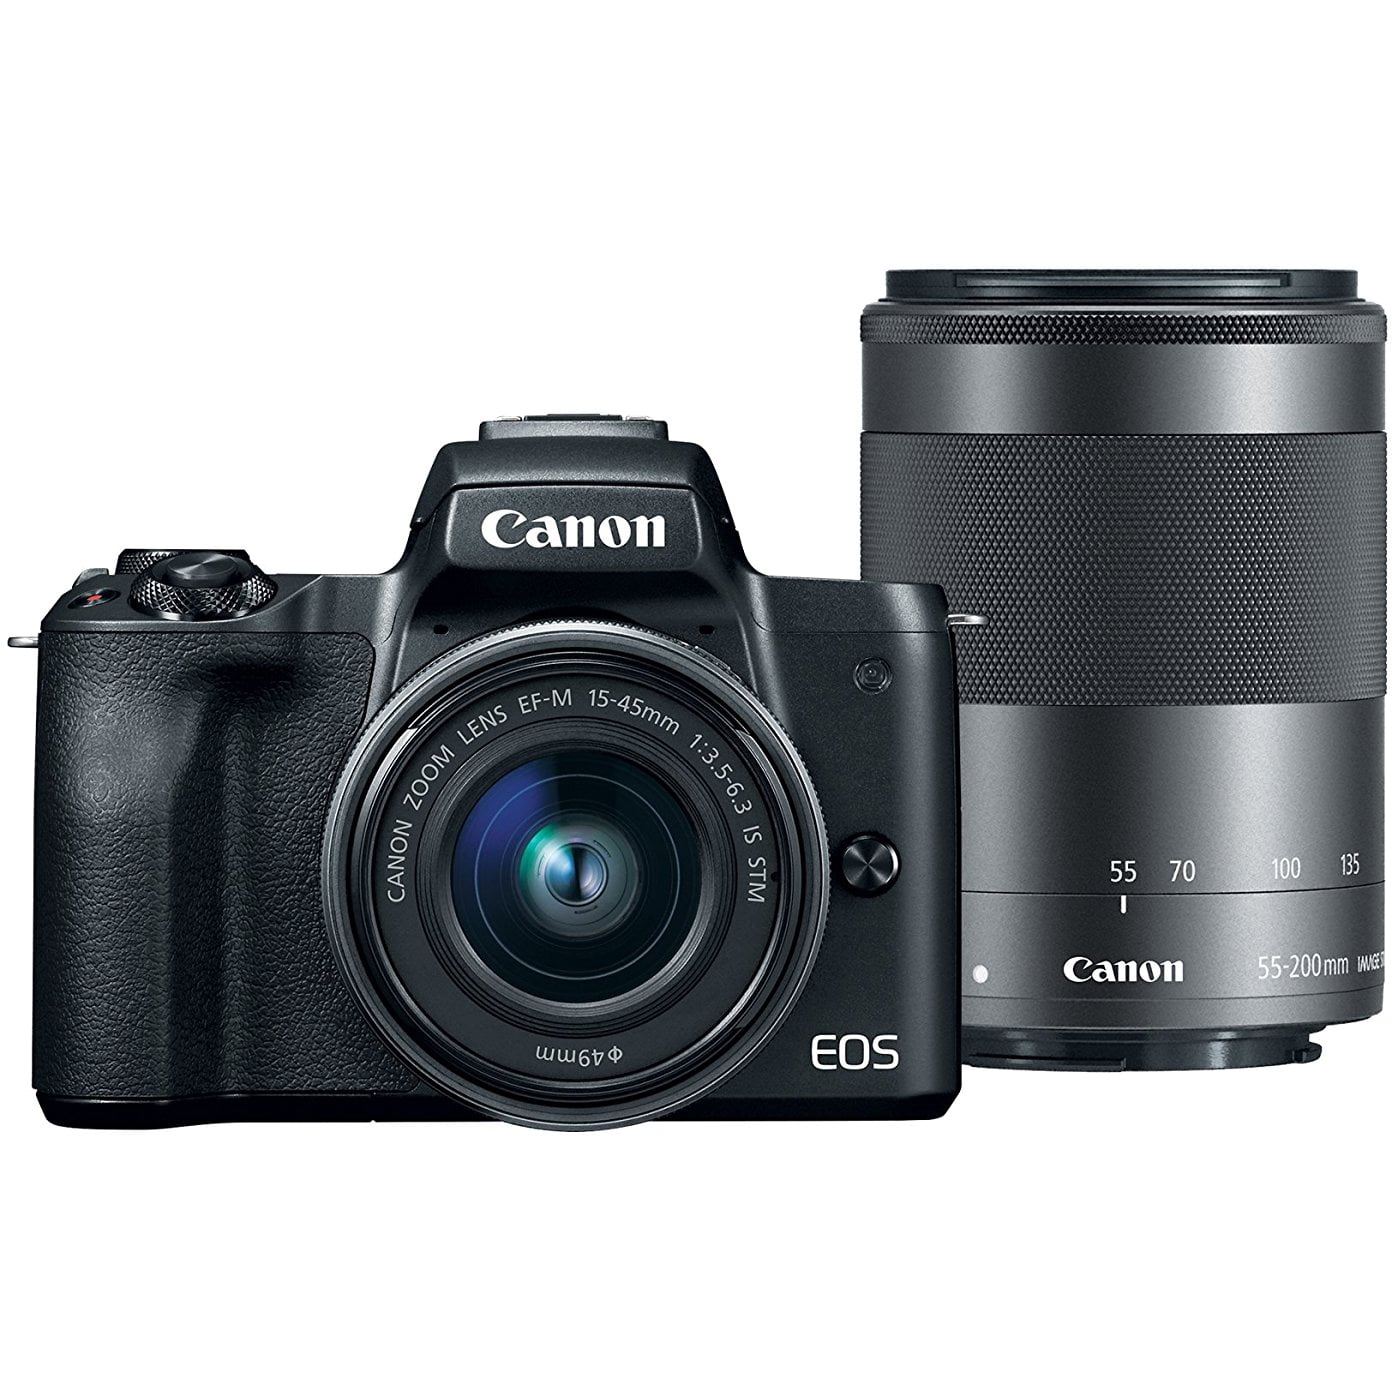 Canon EOS M50 Mirrorless Digital Camera + EF-M 15-45mm f/3.5-6.3 is STM &  EF-M 55-200mm f/4.5-6.3 is STM Lens + Wide Angle & Telephoto Lens + 64GB